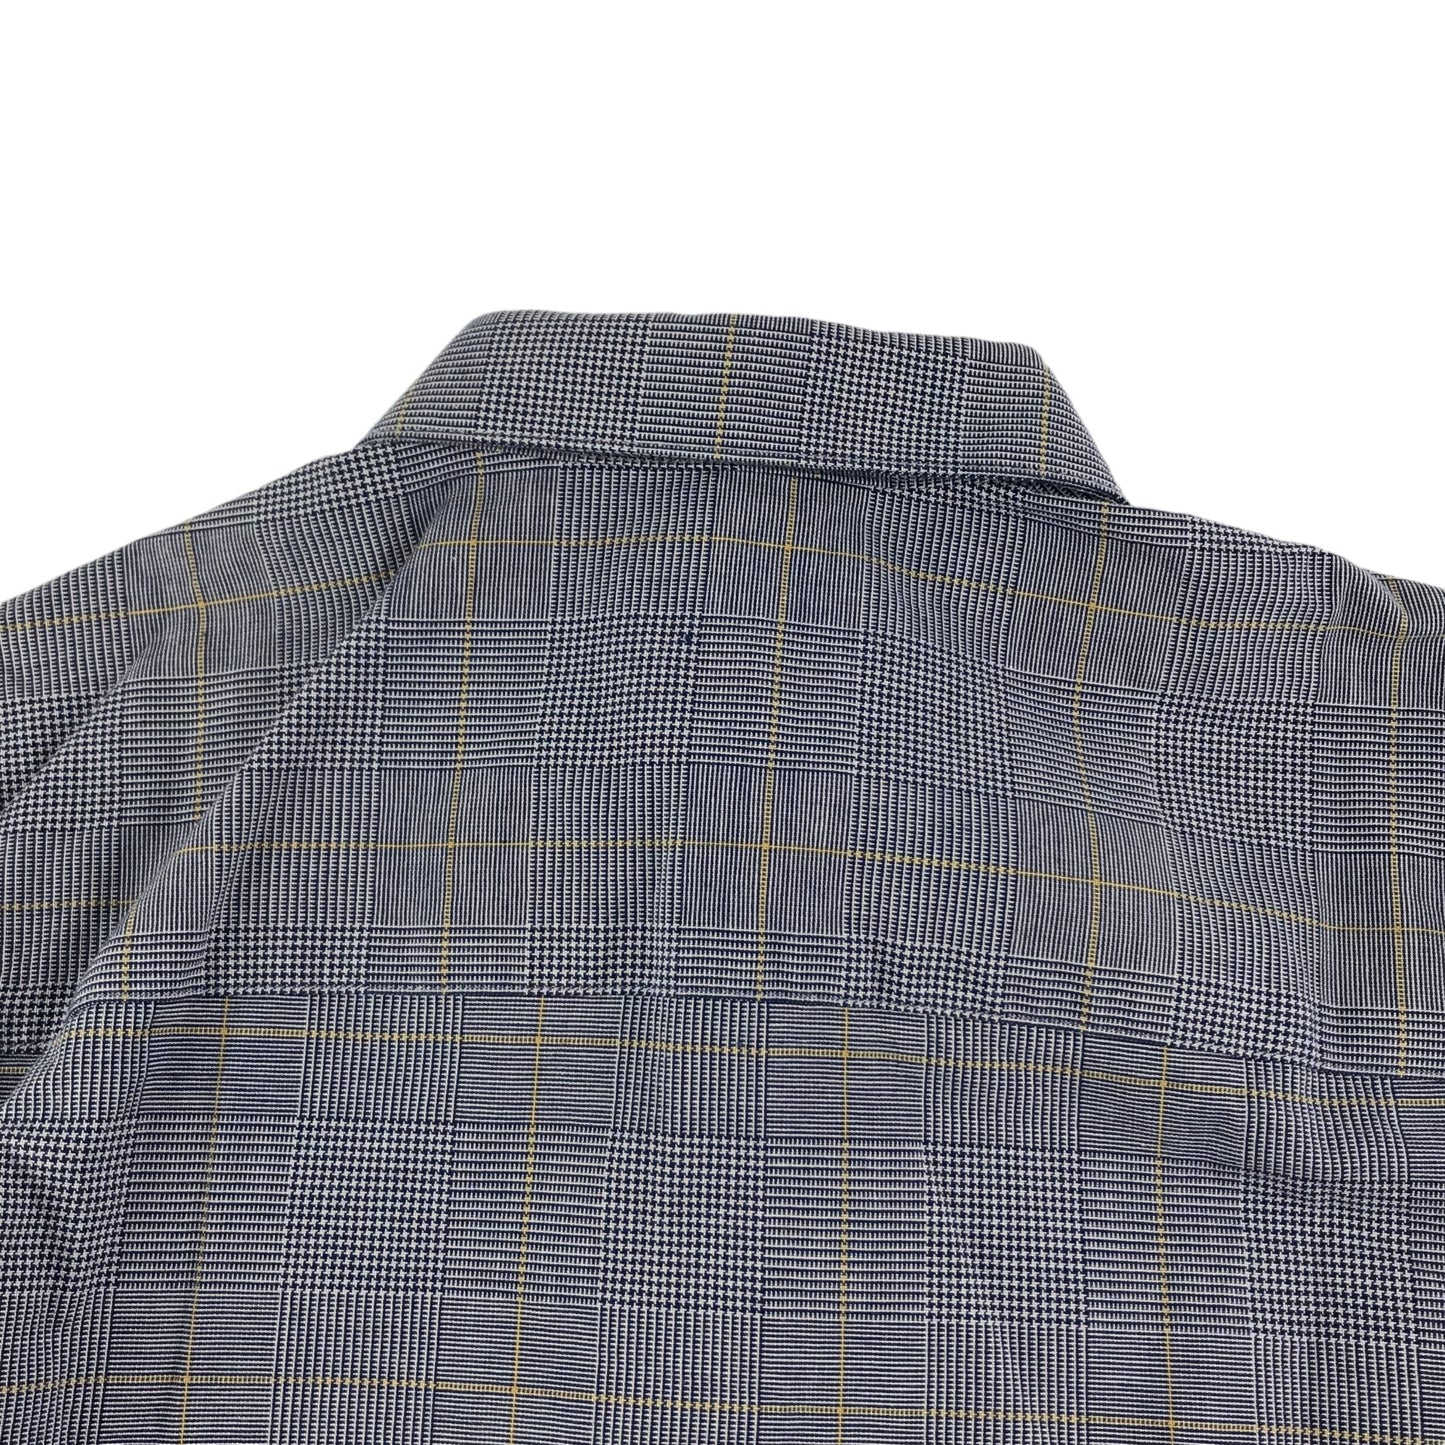 F&F Shirt Age 8 Blue Checked Long Sleeve Button Up Cotton